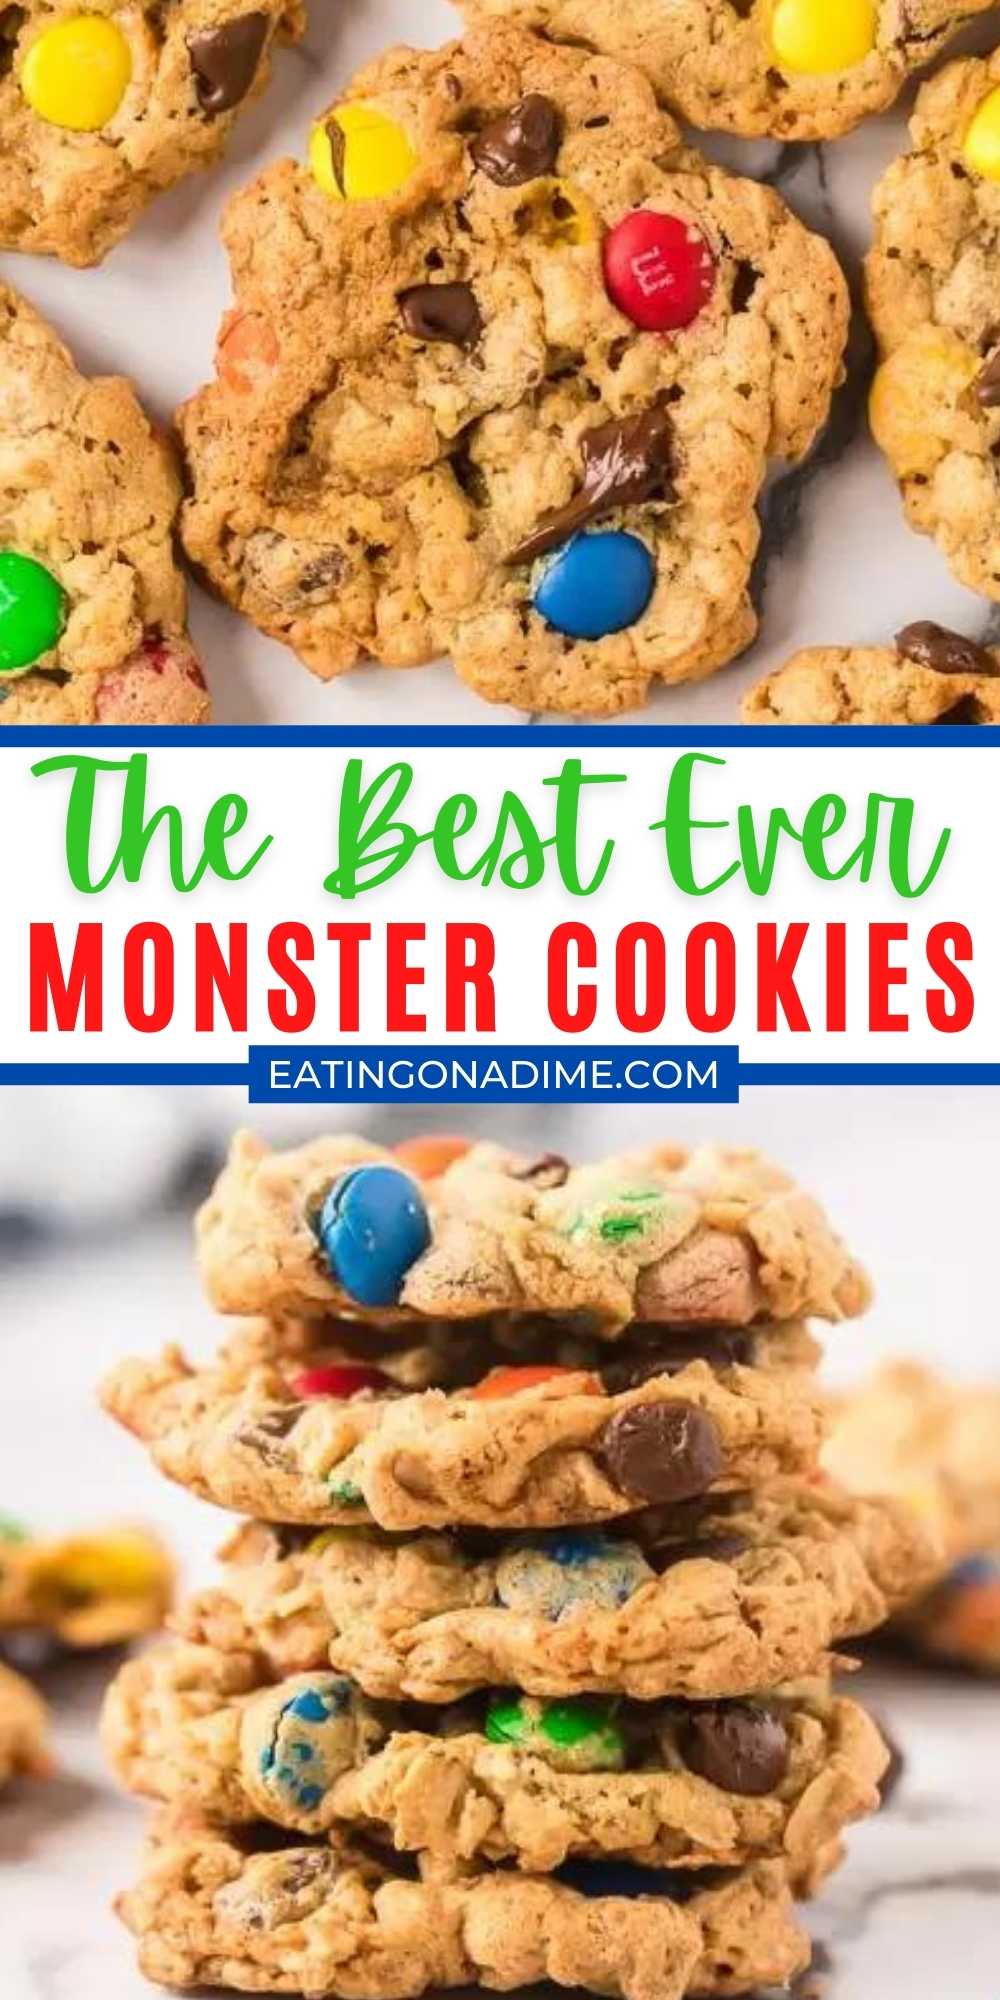 This easy to make monster cookie recipe is loaded with chocolate chips, oatmeal, M&M's and more! Each bite is soft and chewy for the best cookie. This is the best Monster cookie recipe that is easy to make too! #eatingonadime #cookierecipes #monstercookies #easydesserts 
